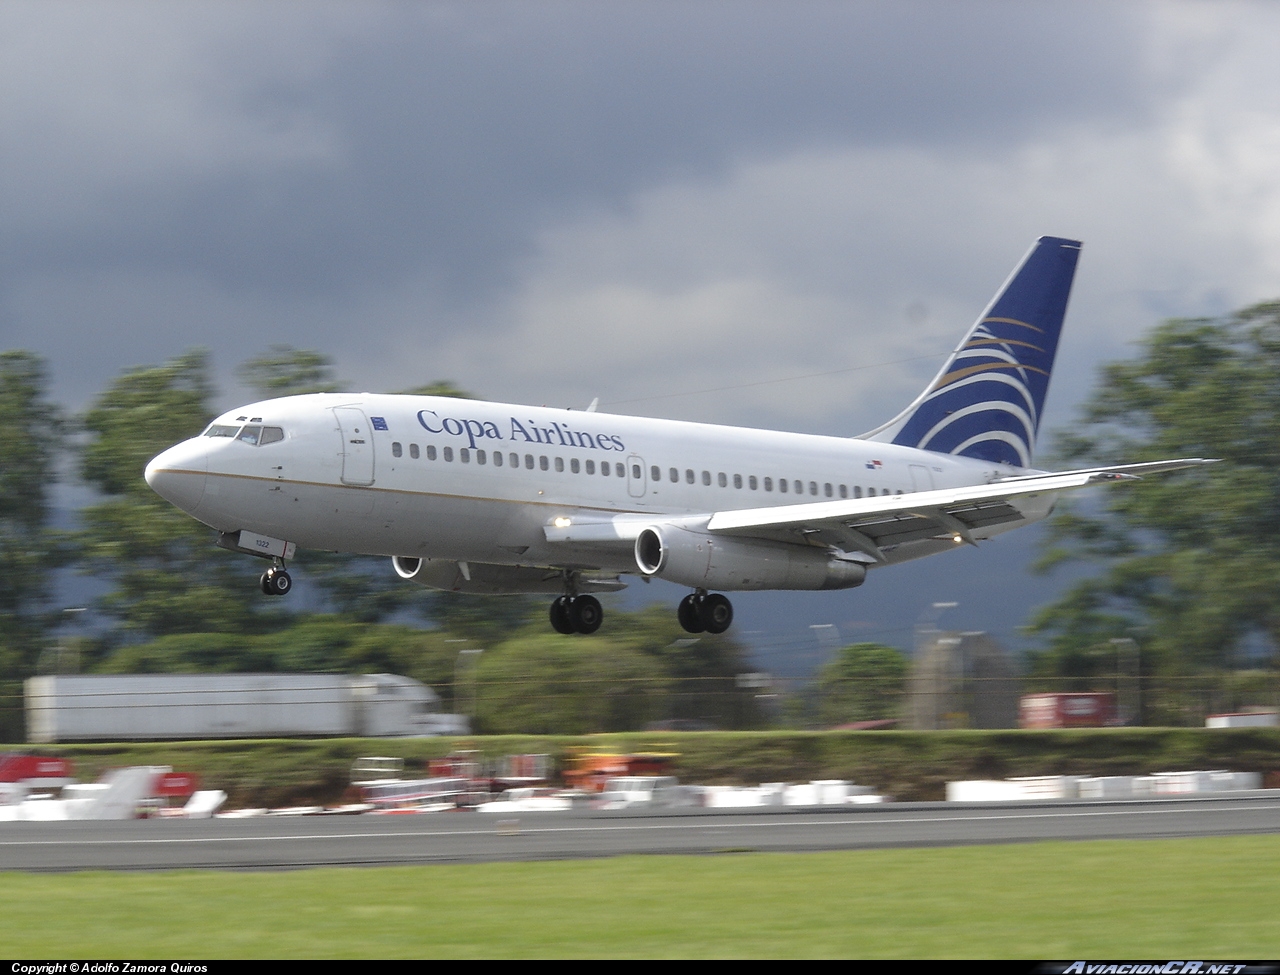 HP-1322CMP - Boeing 737-2P5(Adv) - Copa Airlines